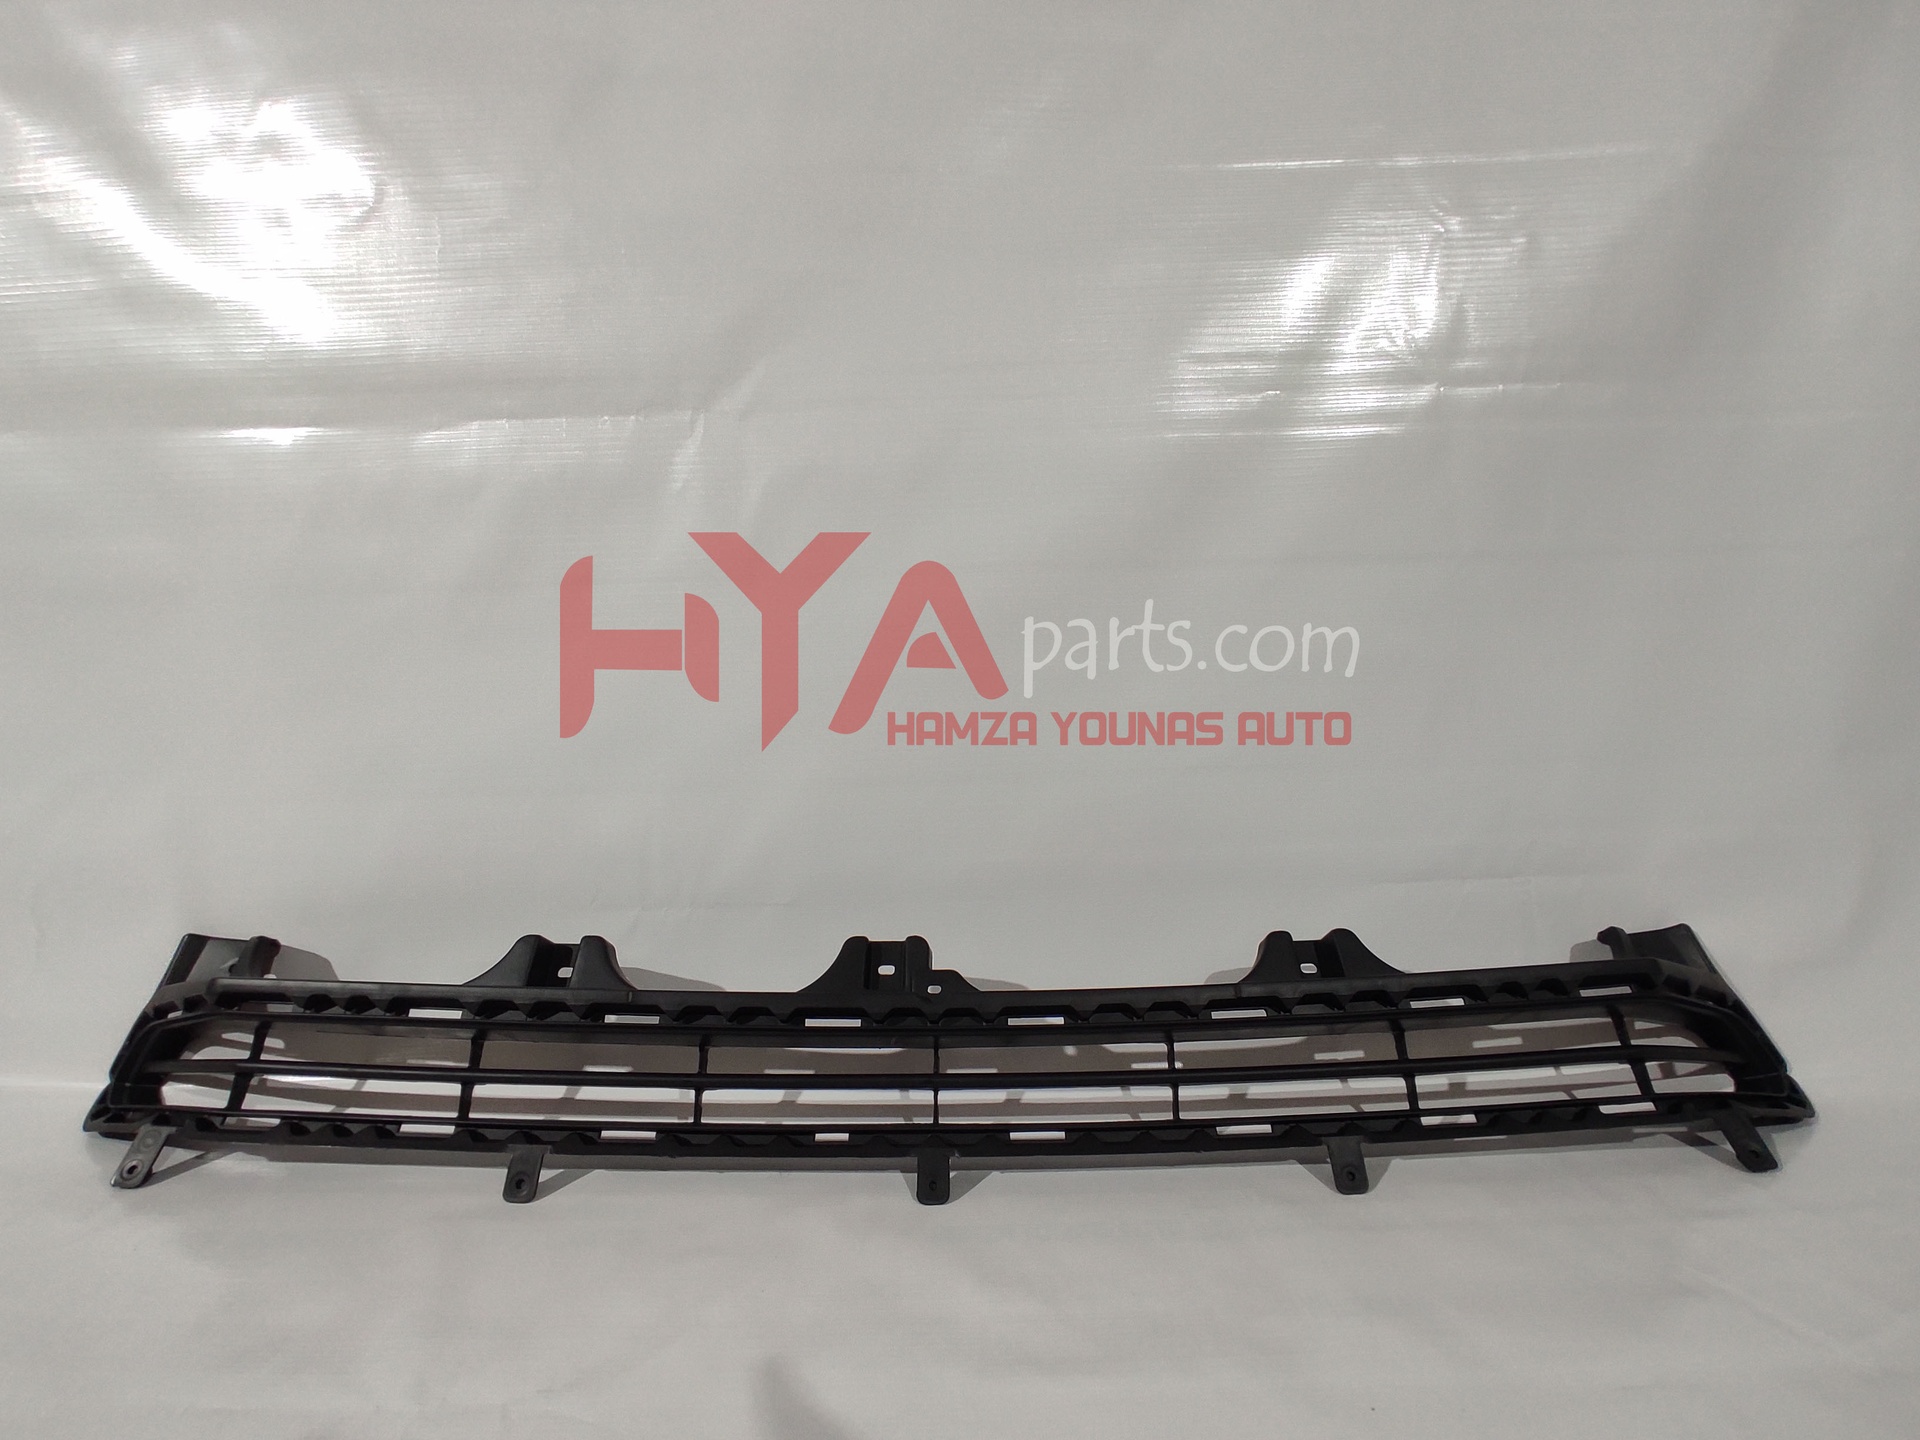 [FPI TYBF 277 NA] GRILLE, RADIATOR, LOWER NO.1 (BUMPER GRILL)